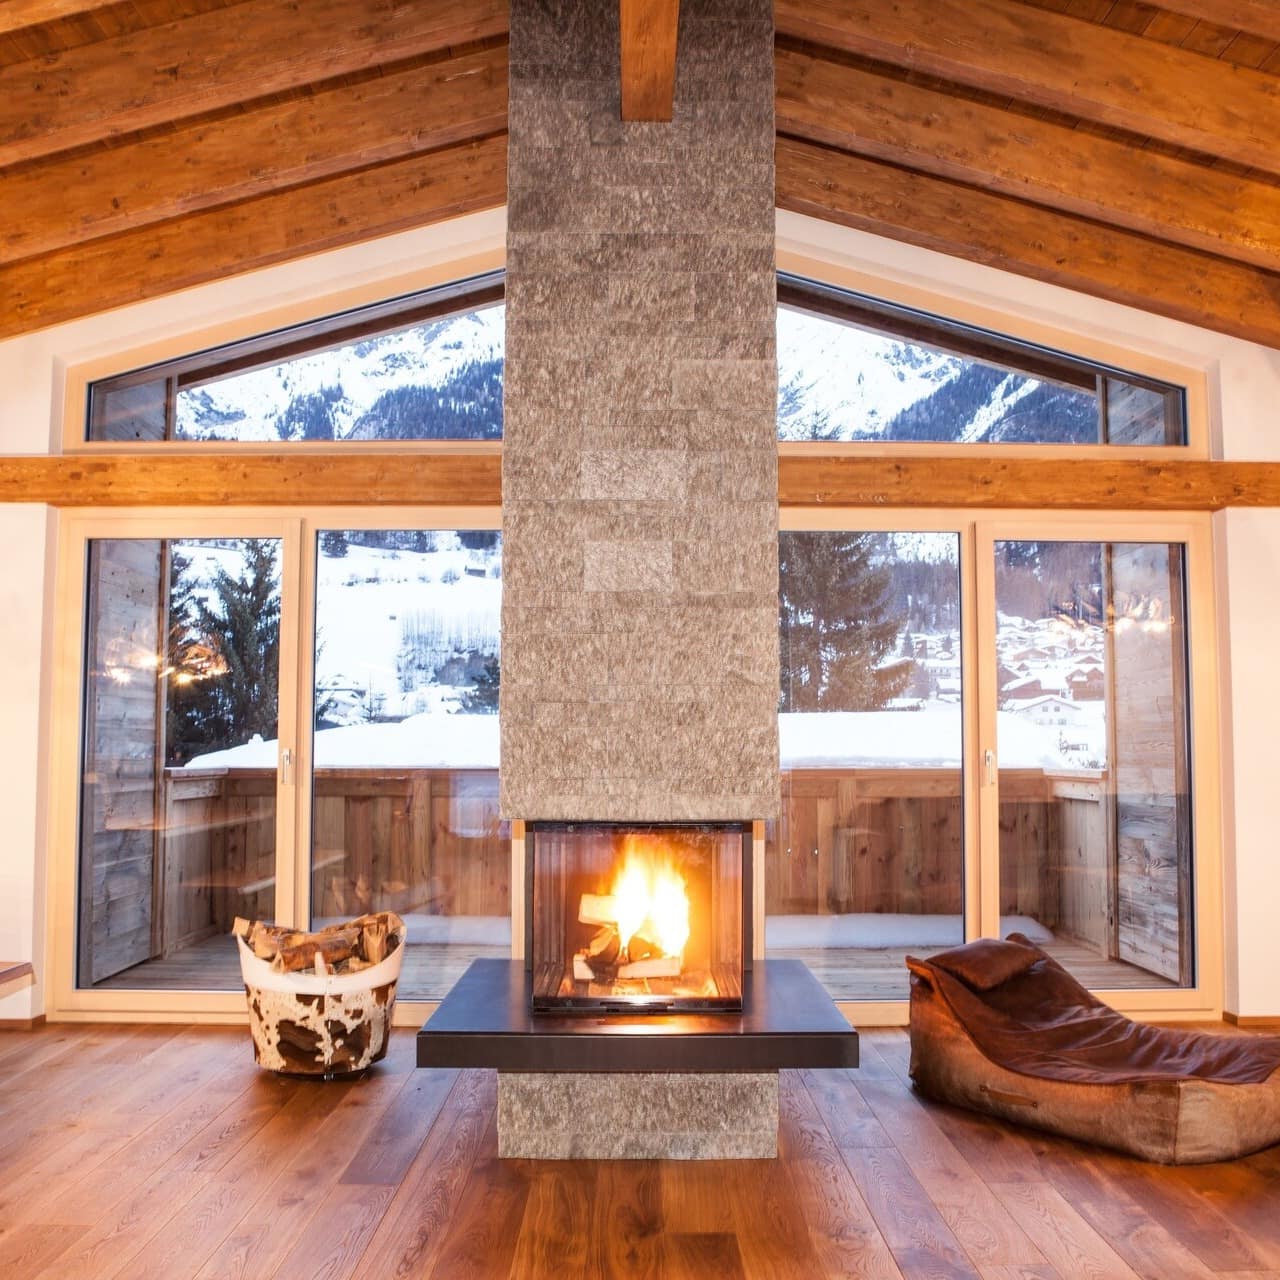 Fireplace centred in a living area of a chalet in Tyrol, Austria, with views of the snowy mountains through the glass 